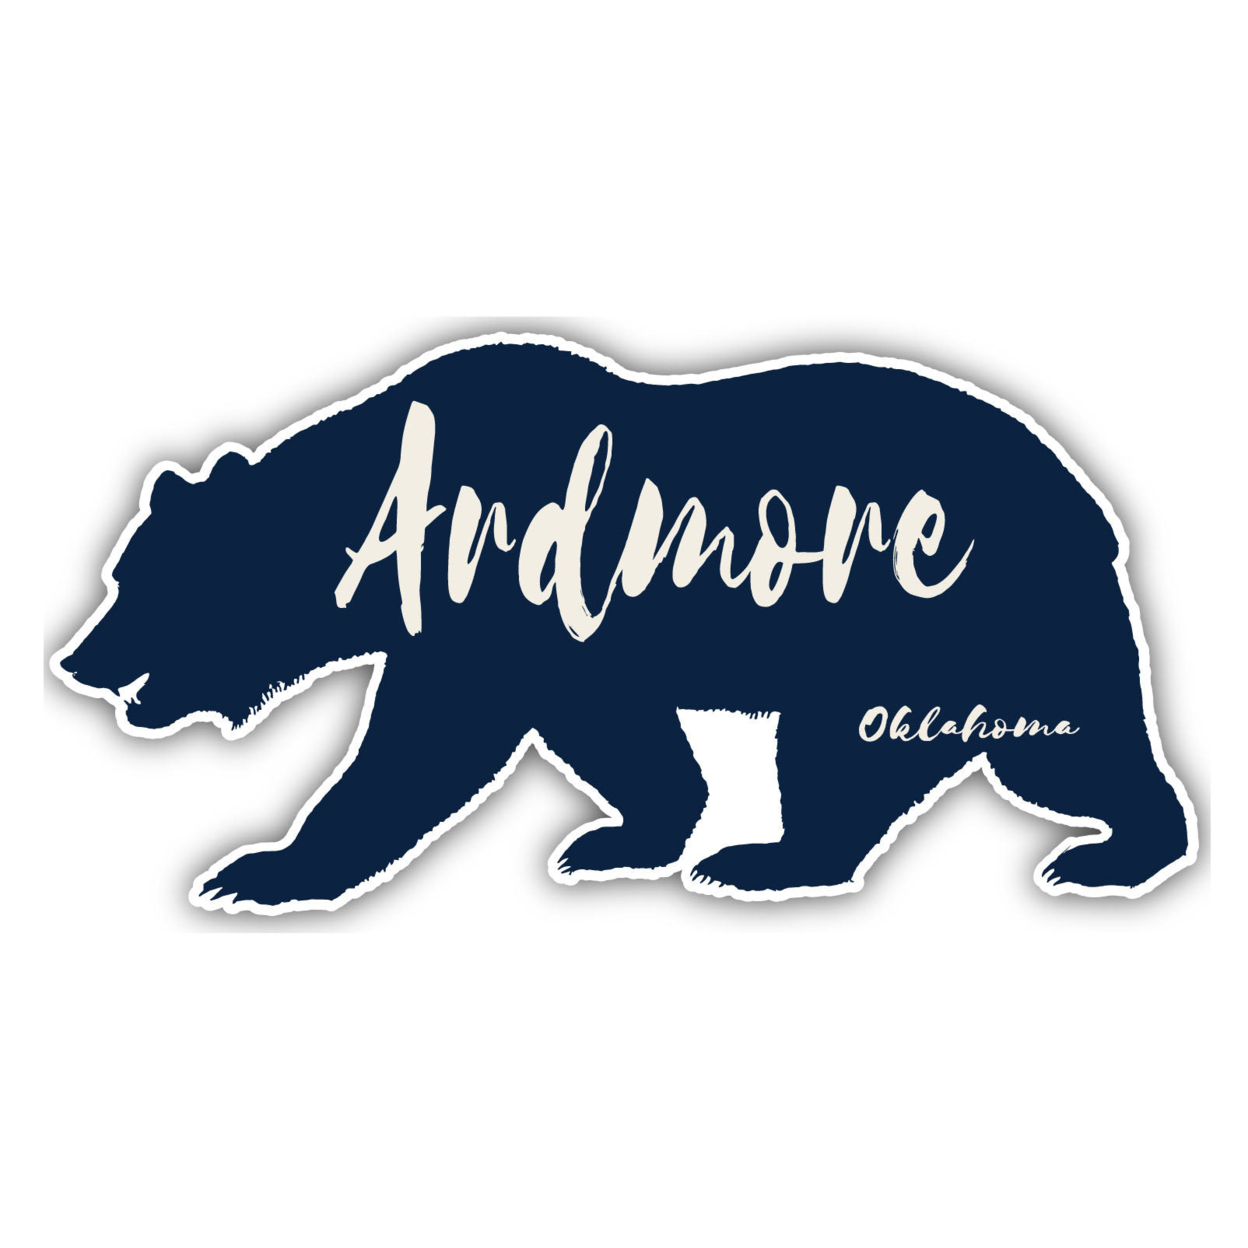 Ardmore Oklahoma Souvenir Decorative Stickers (Choose Theme And Size) - 4-Pack, 4-Inch, Tent